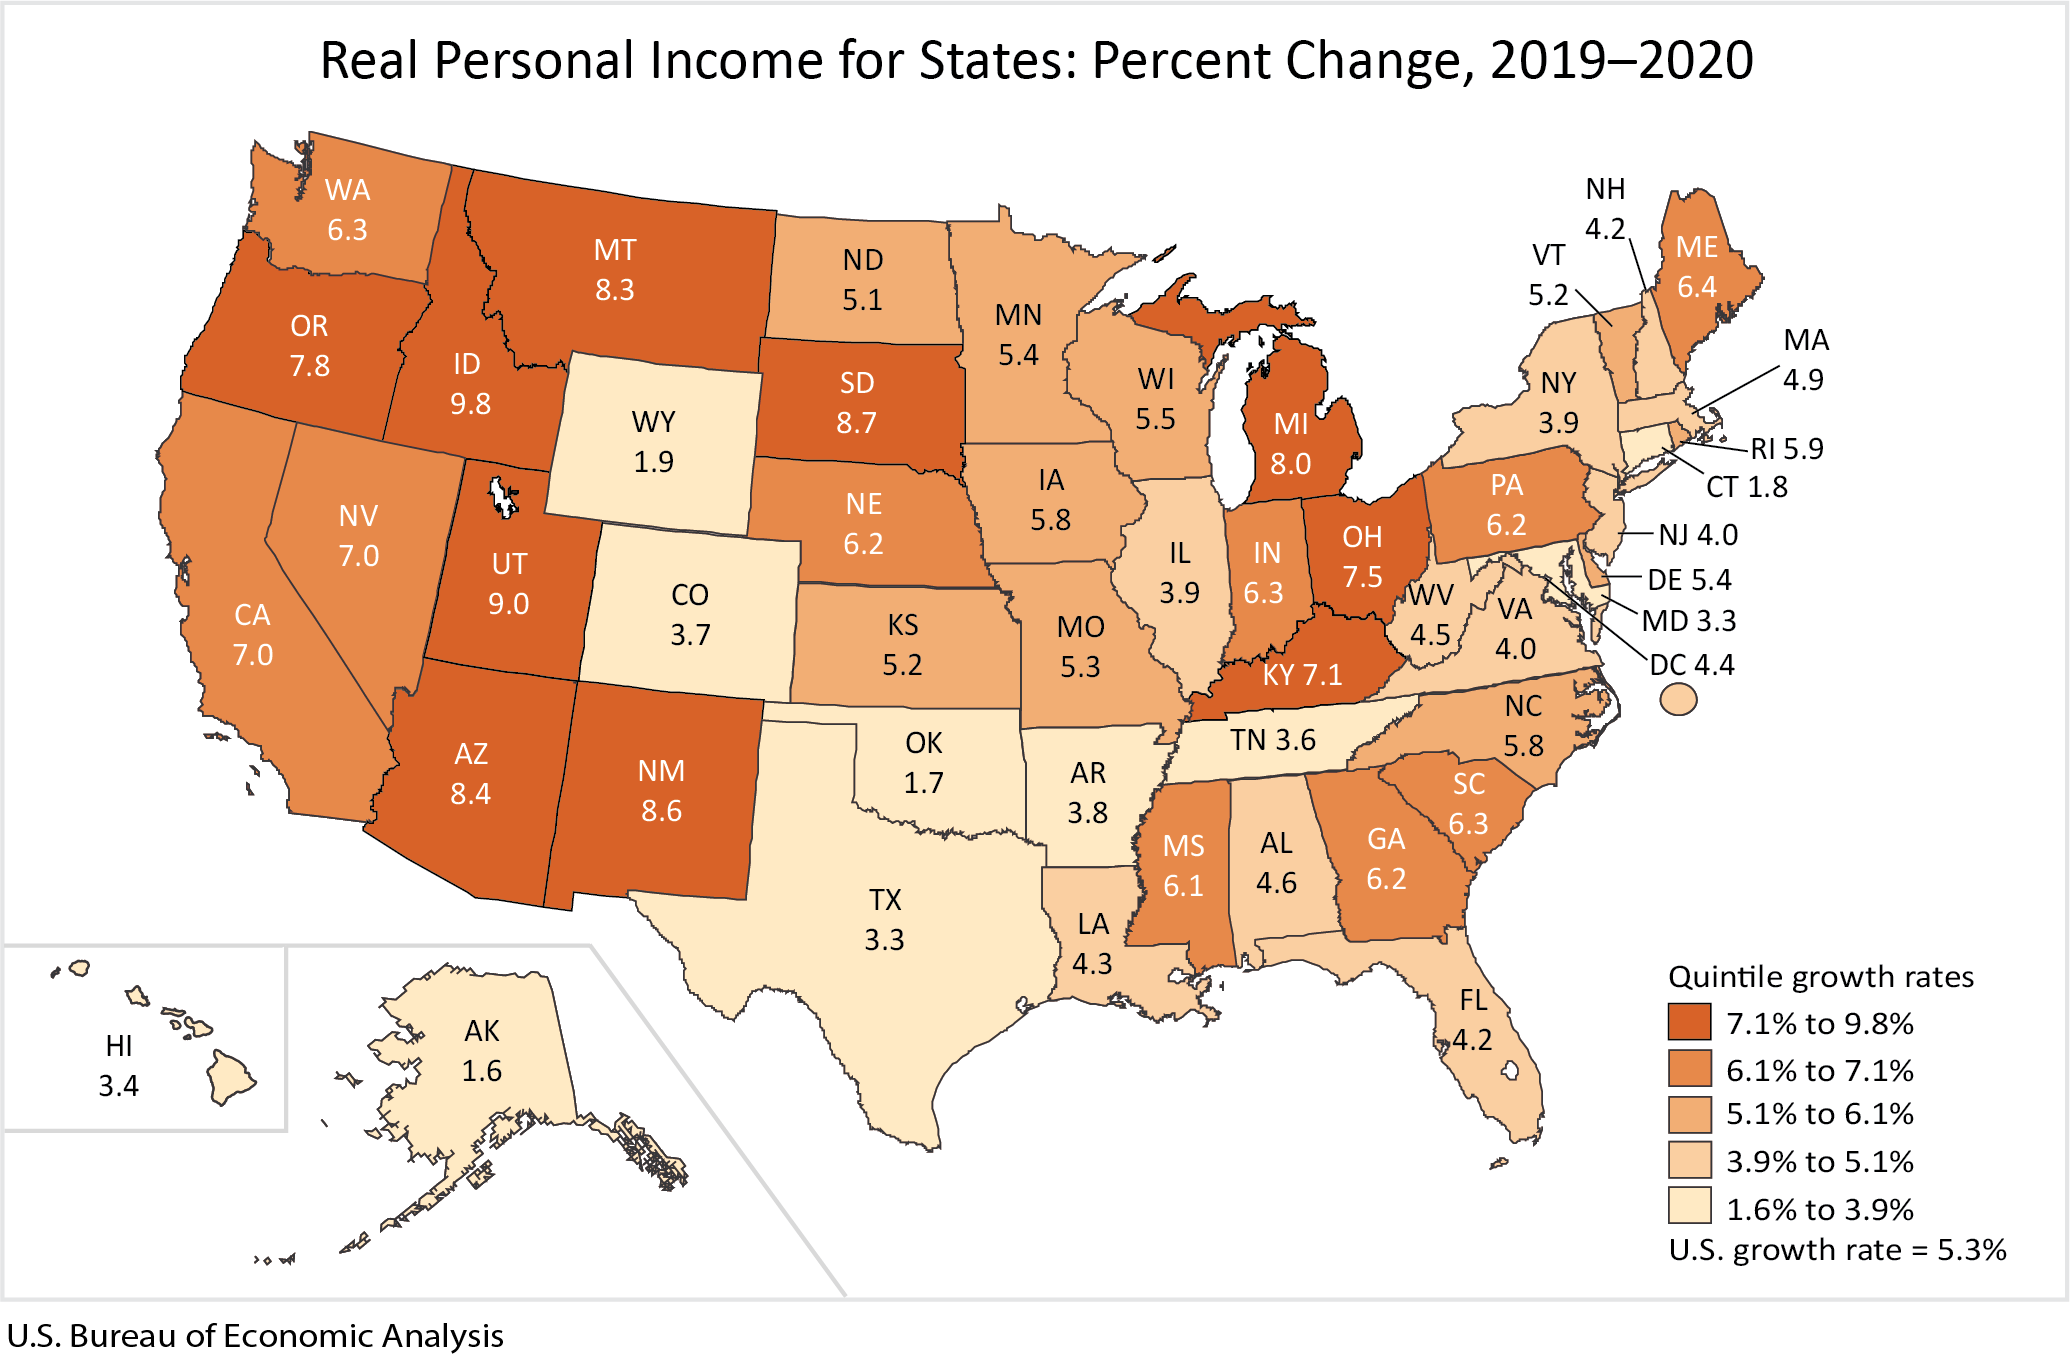 Real Personal Income for States: Percent Change, 2019-2020